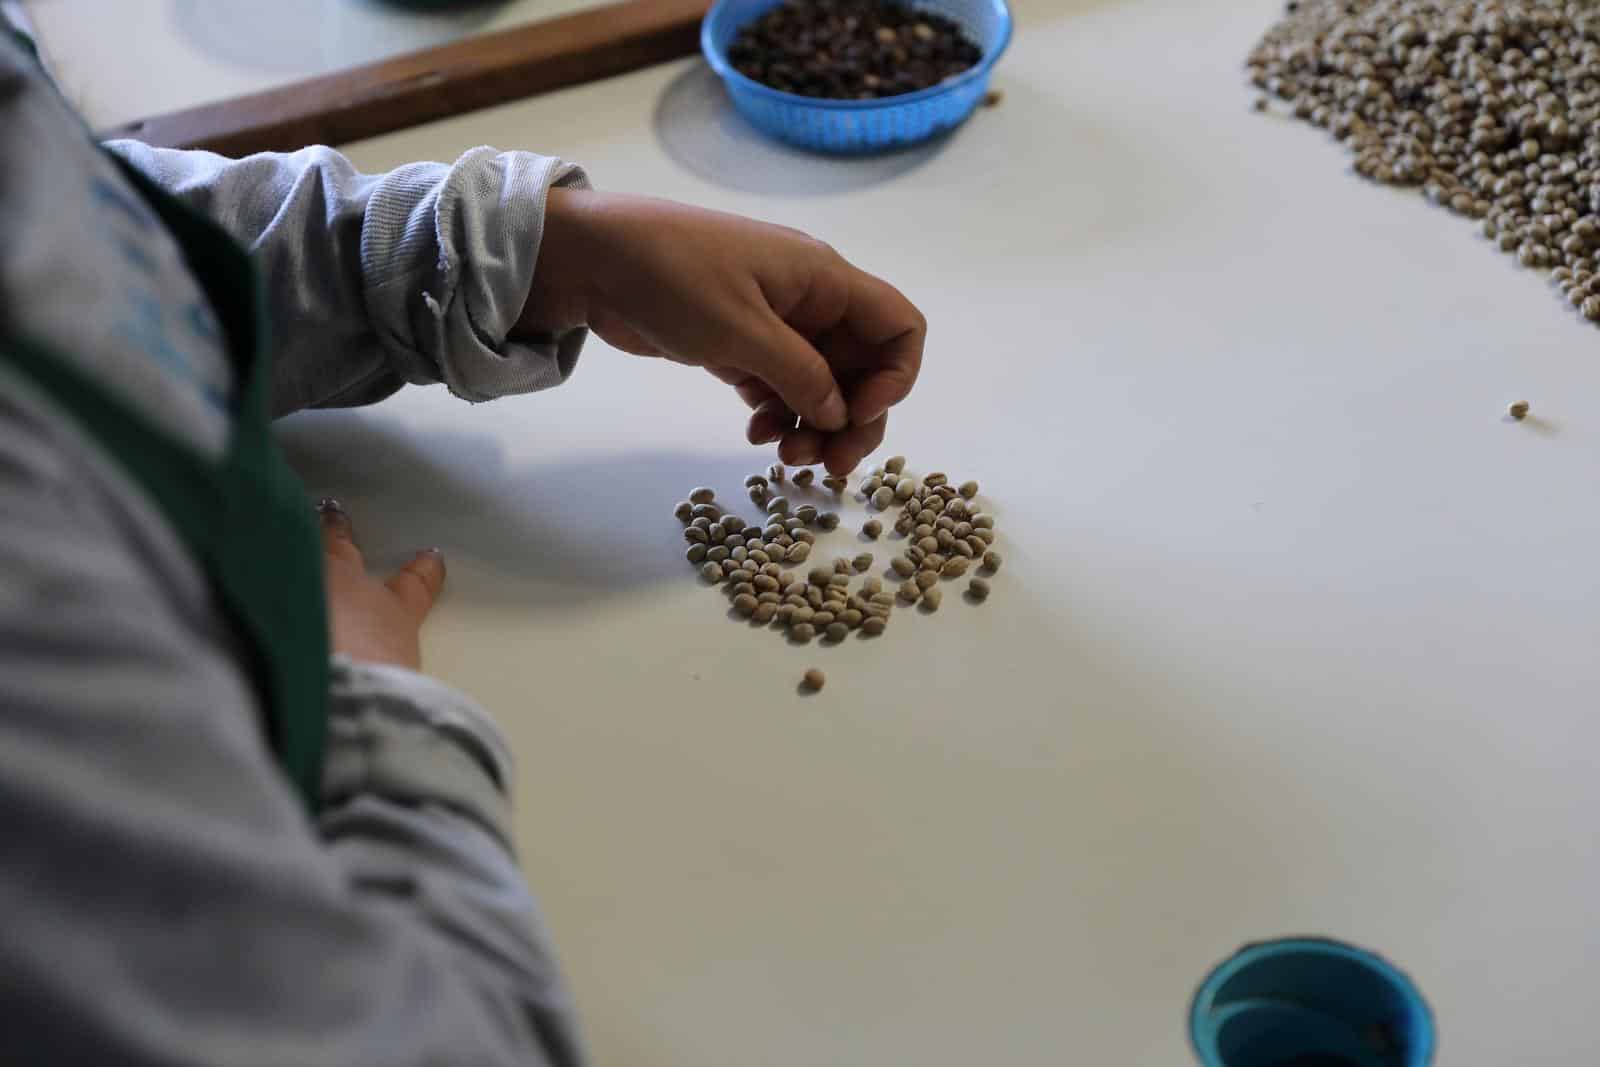 Processing coffee beans